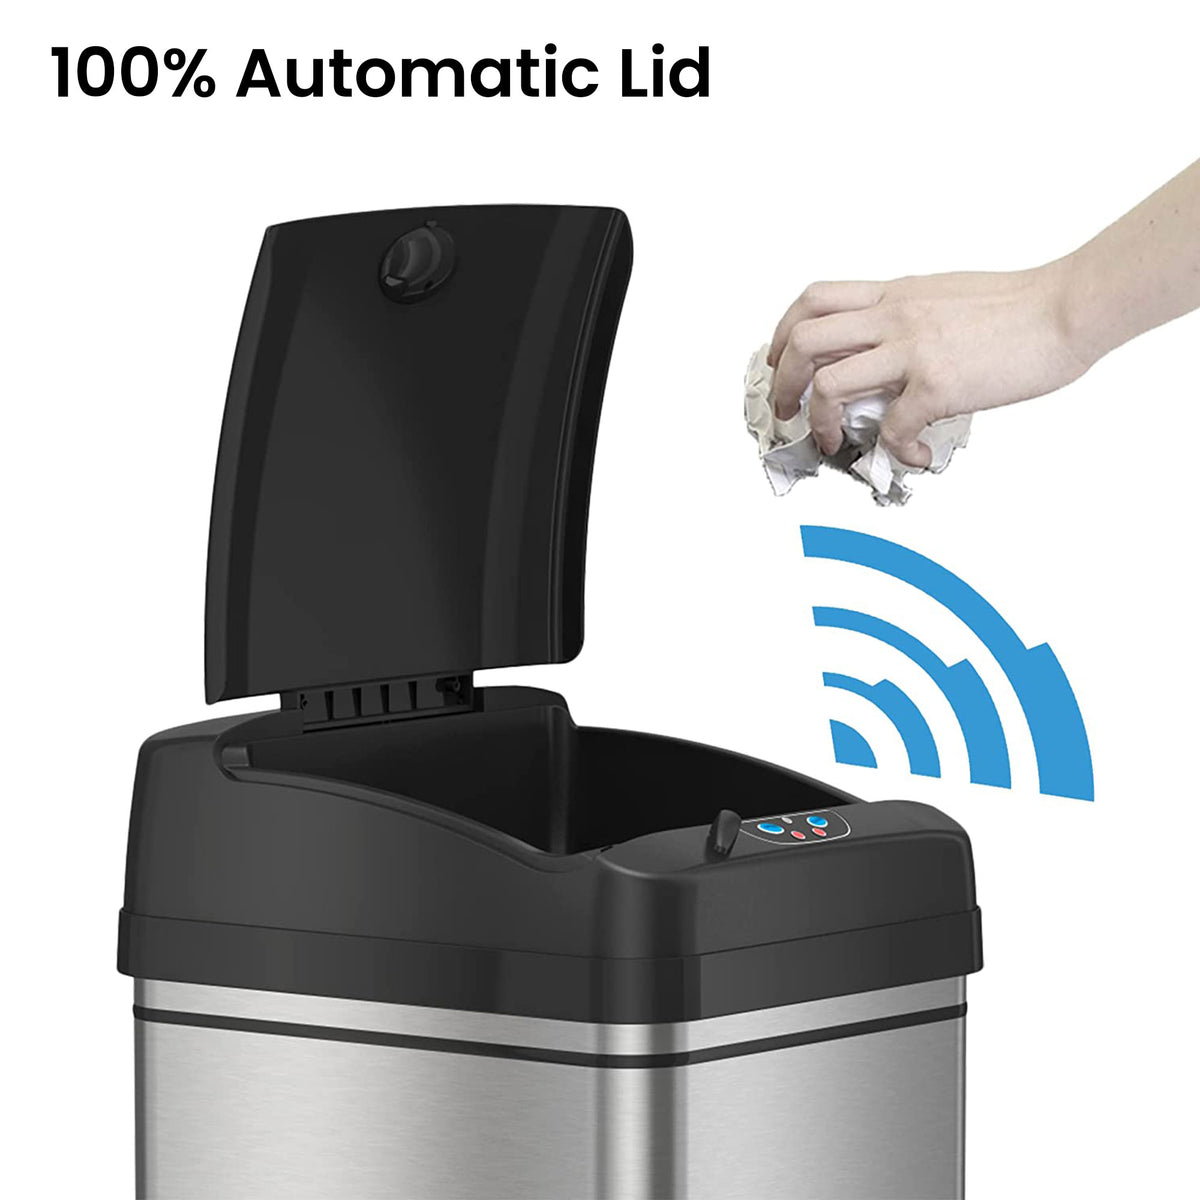 100% Automatic Lid iTouchless DZT13P Touchless Sensor Trash Can with Odor Filter